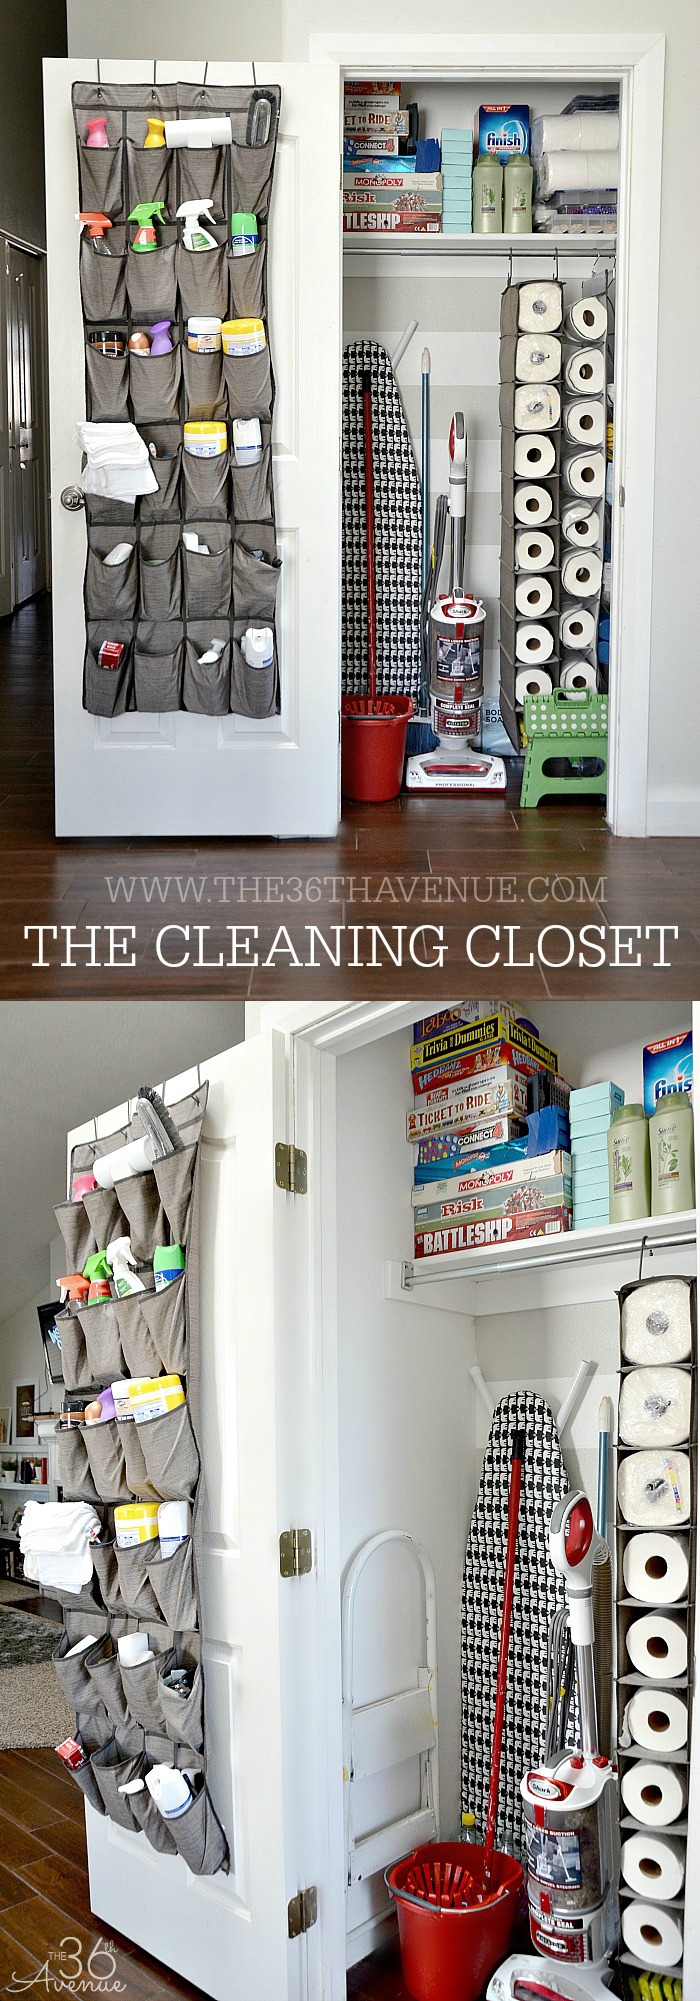 Cleaning Closet Must-Haves​ and Tools 